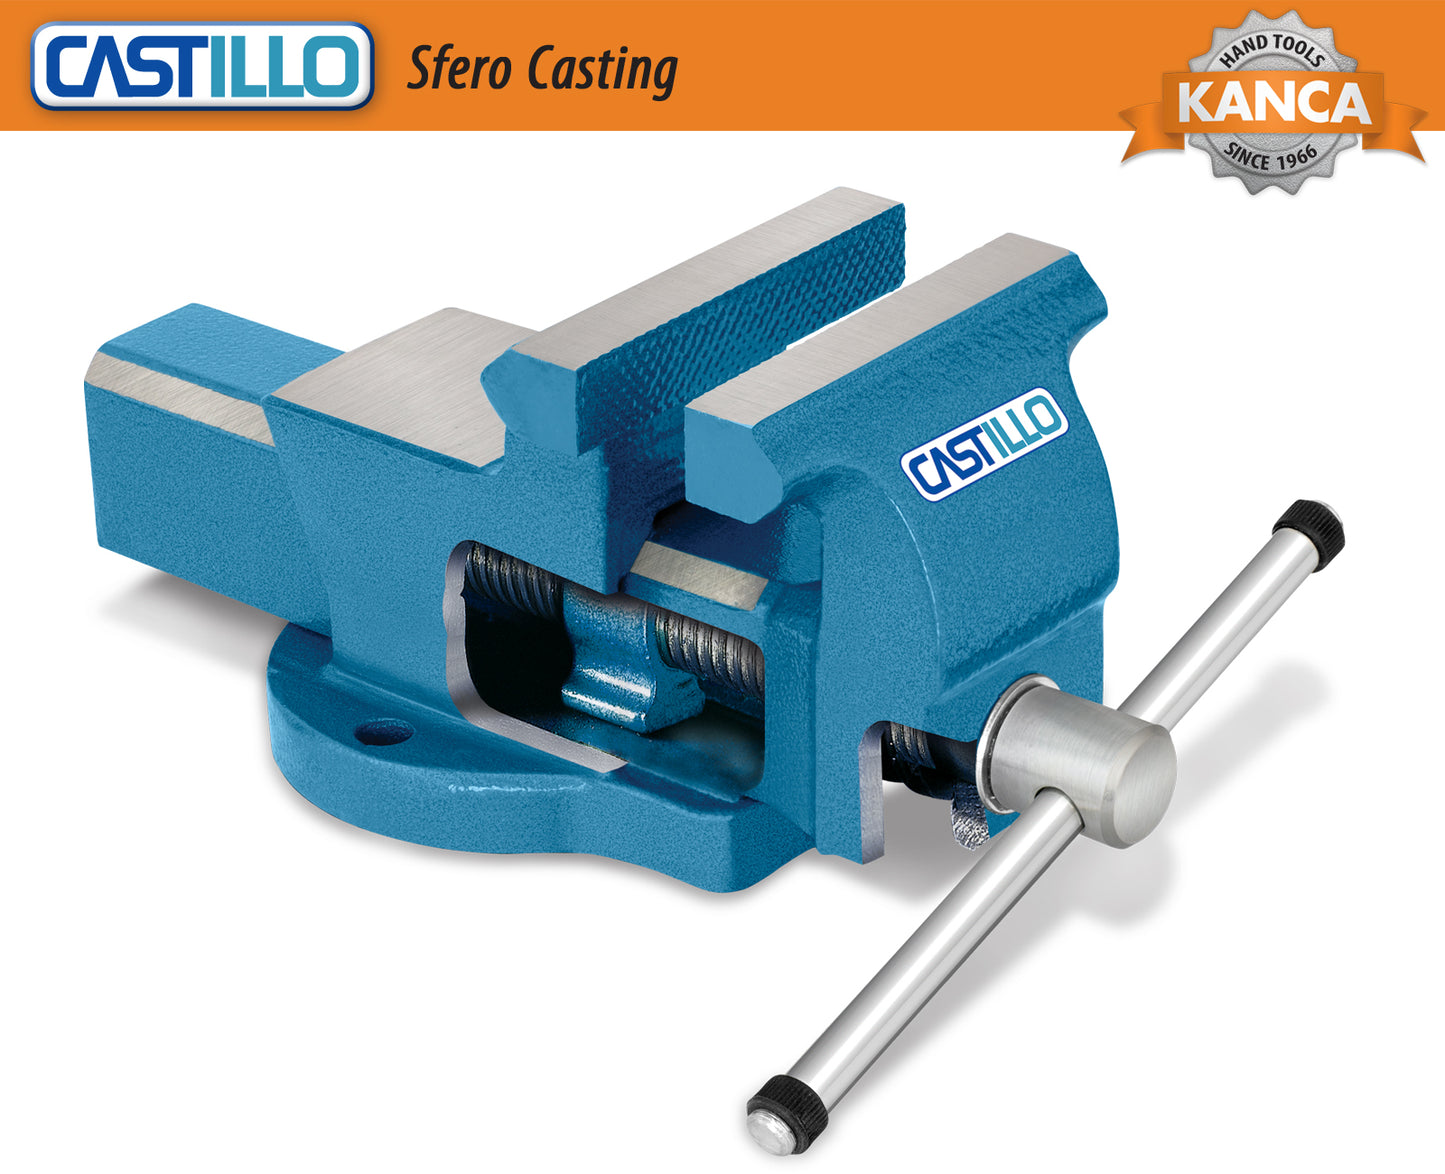 KANCA-CASTILLO, CAS-100, Bench Vise Made of Ductile Iron 4'' inch 77.000 PSI Cast Vise Jaws and Anvil Hardened